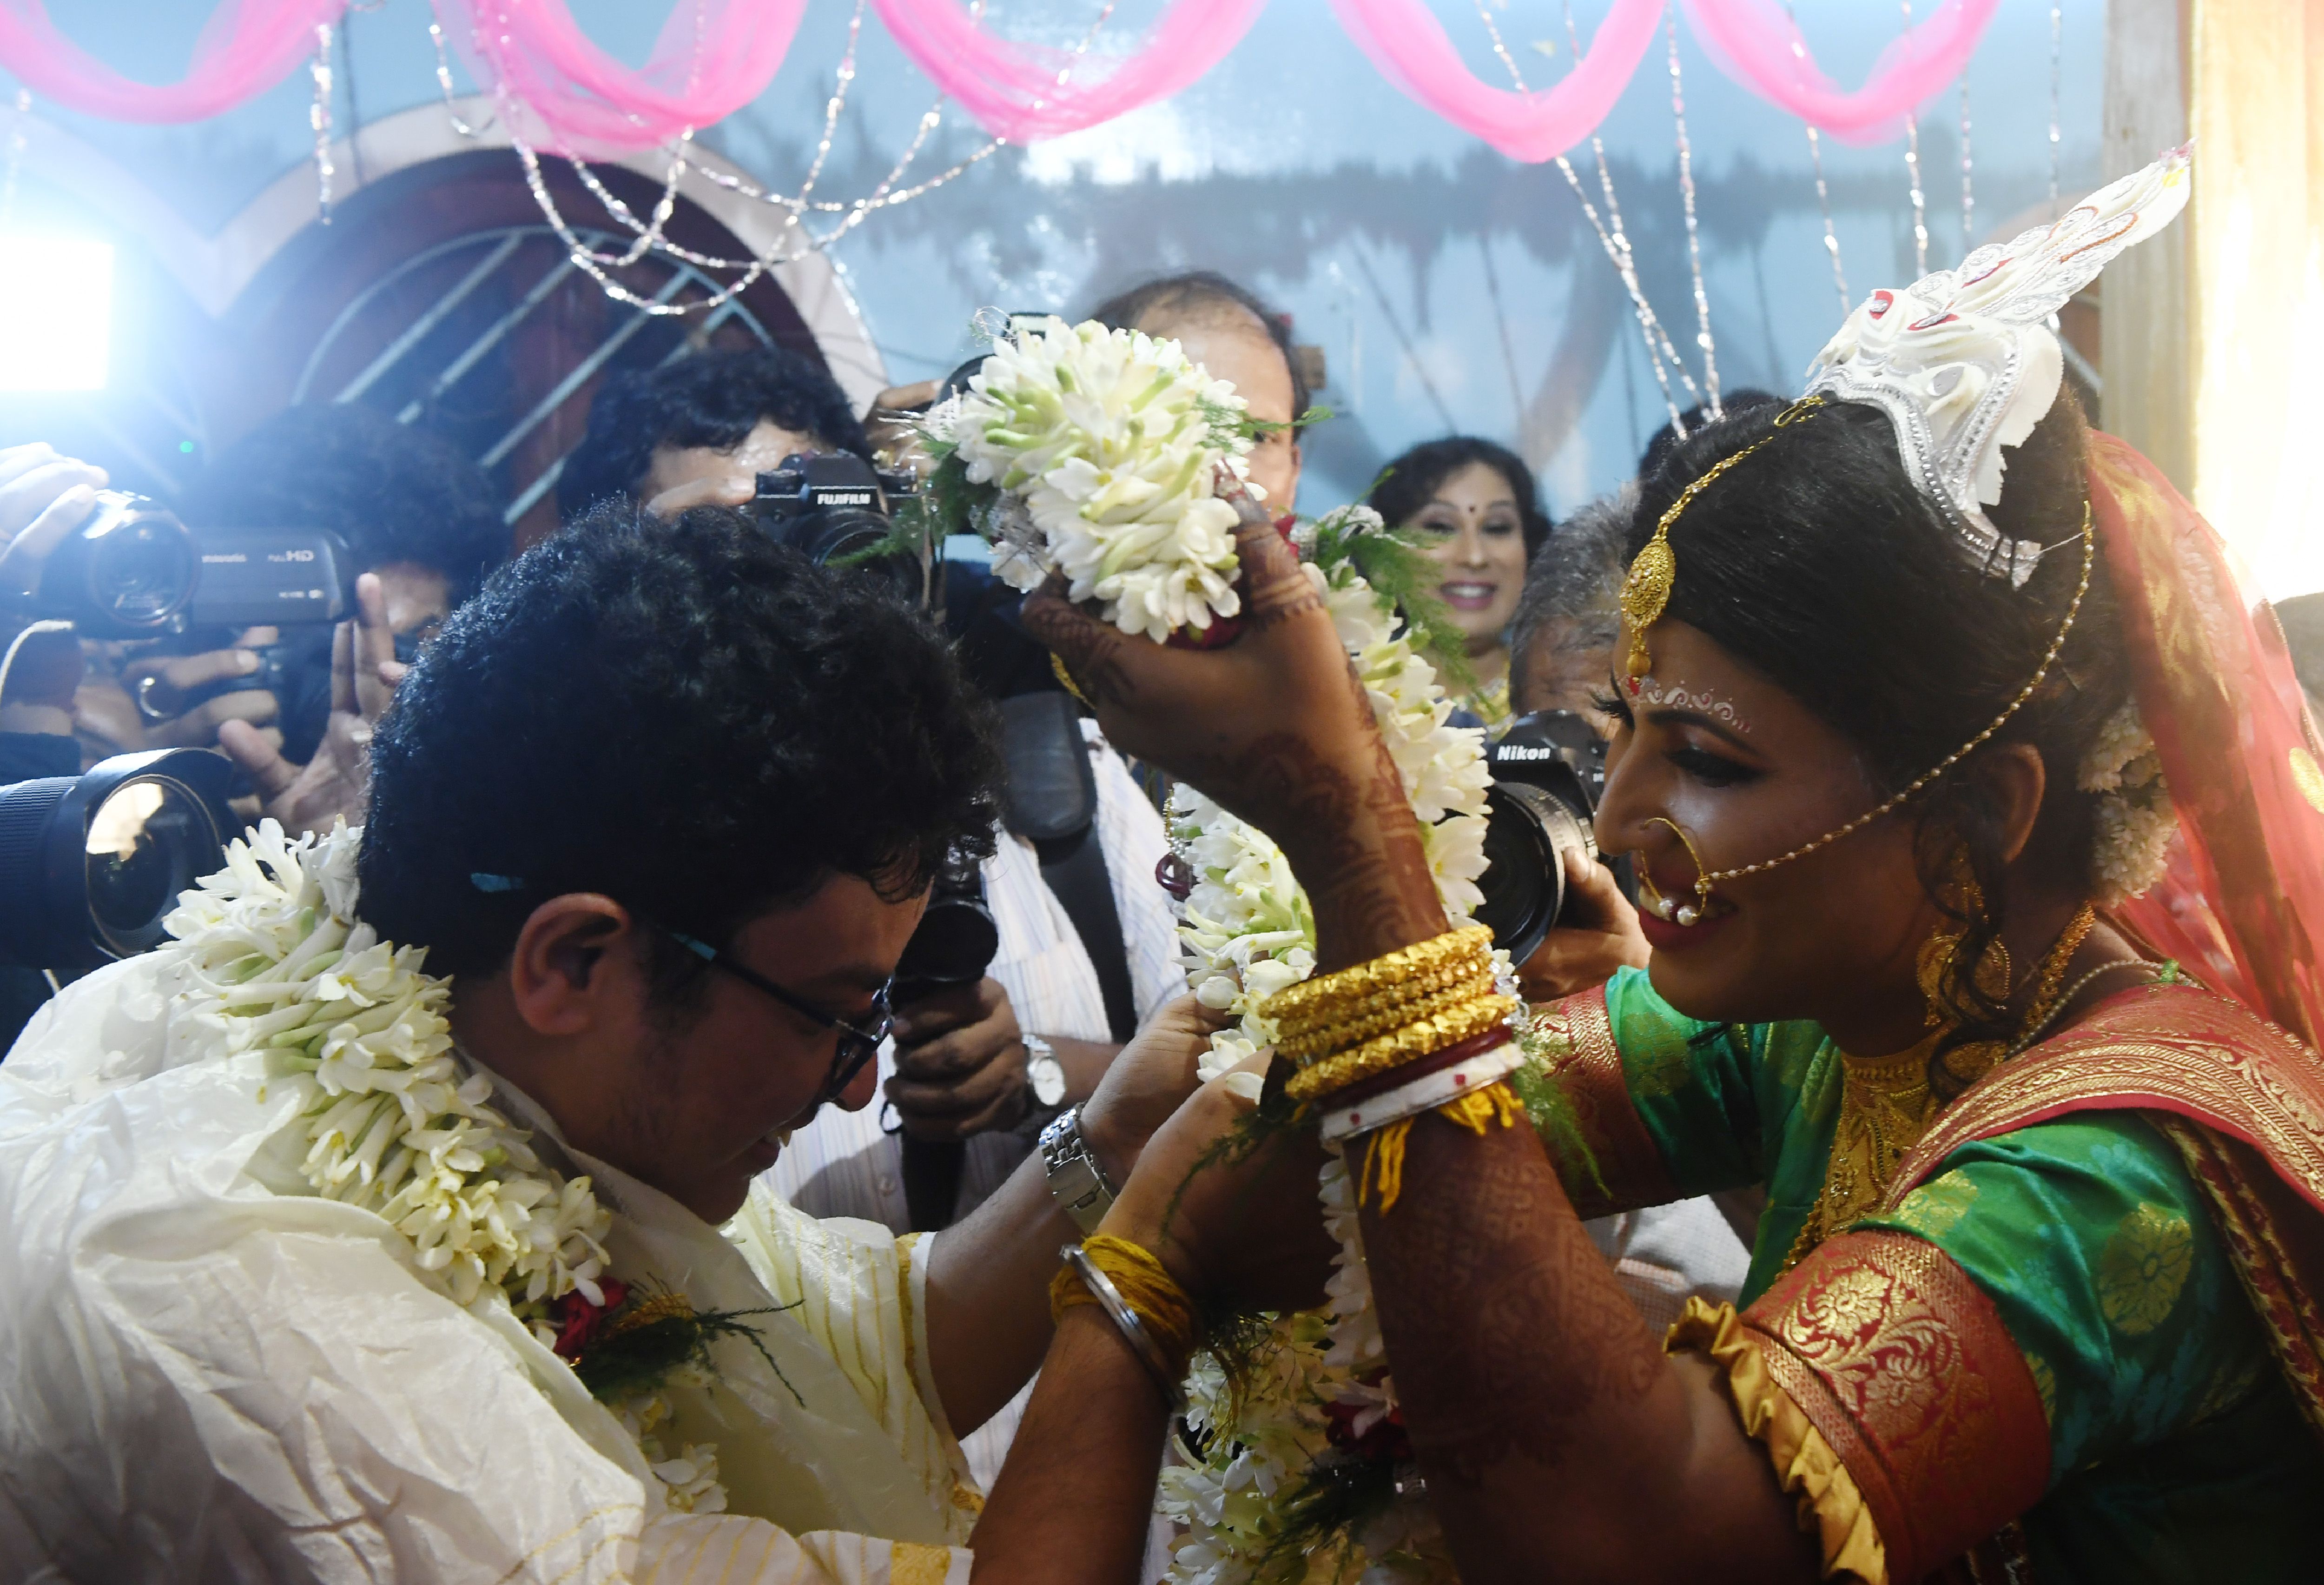 Trans man and trans woman marry in beautiful Indian wedding ceremony PinkNews